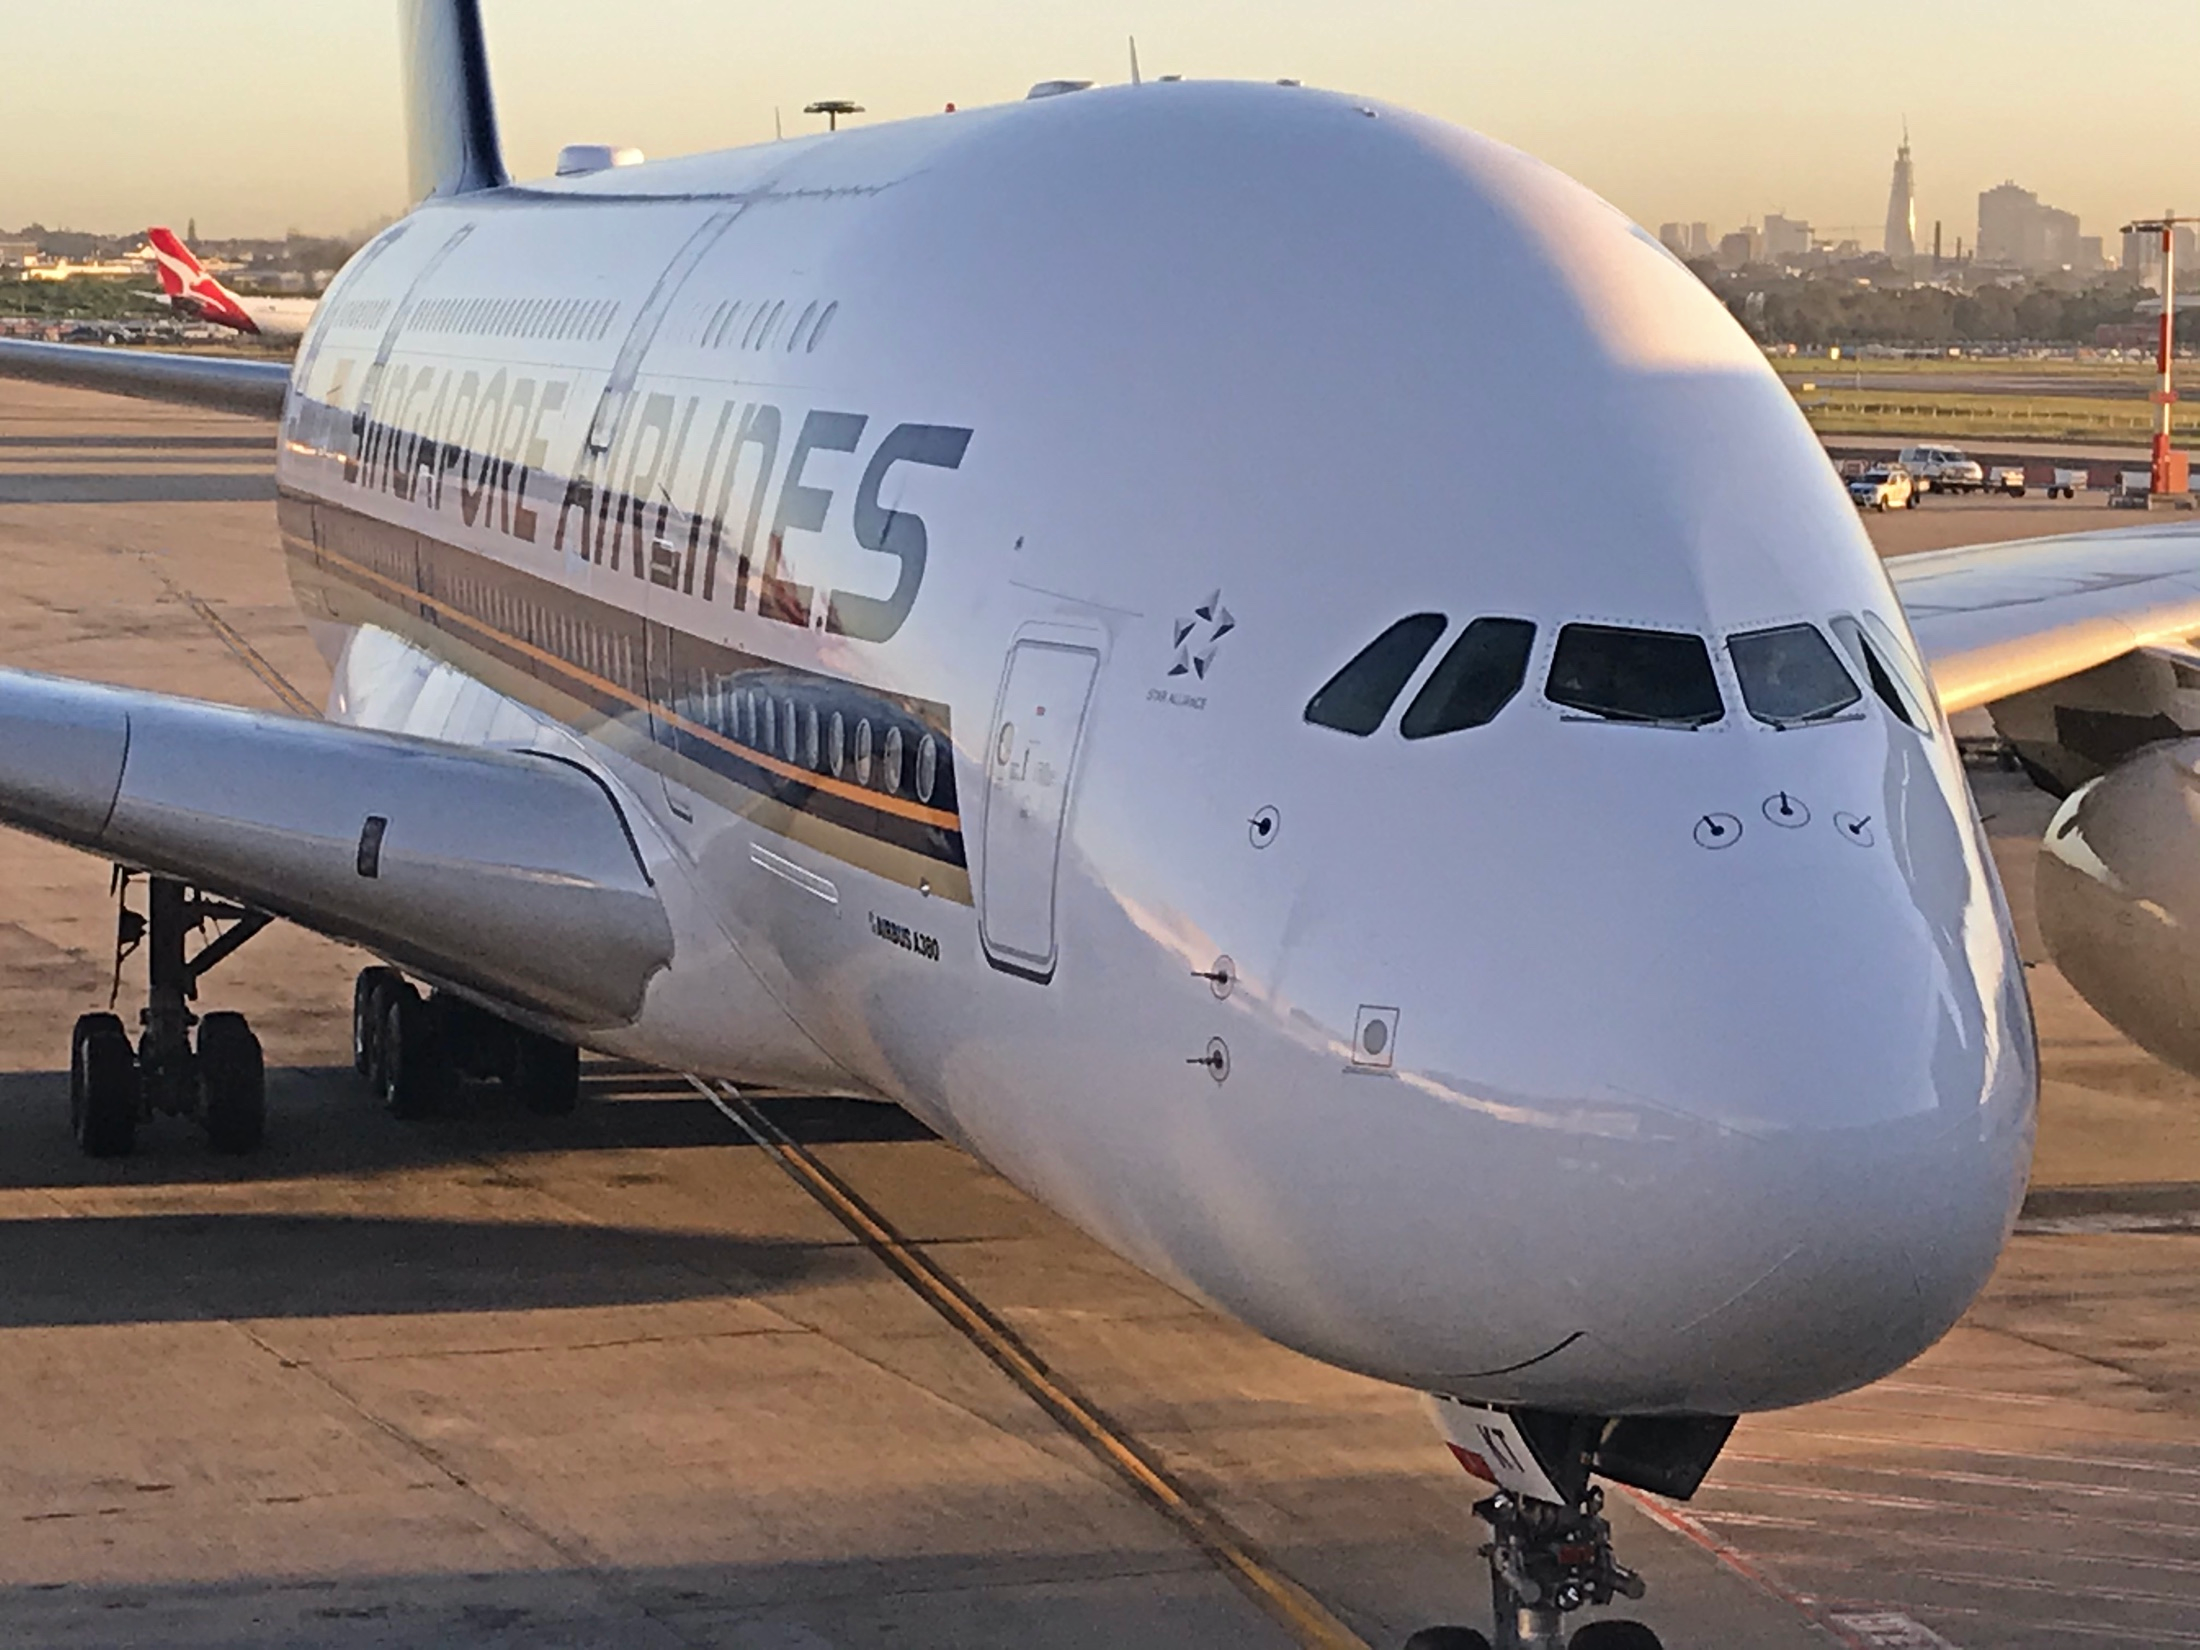 Singapore-Airlines-Airbus-A380-800-Sydney-Airport